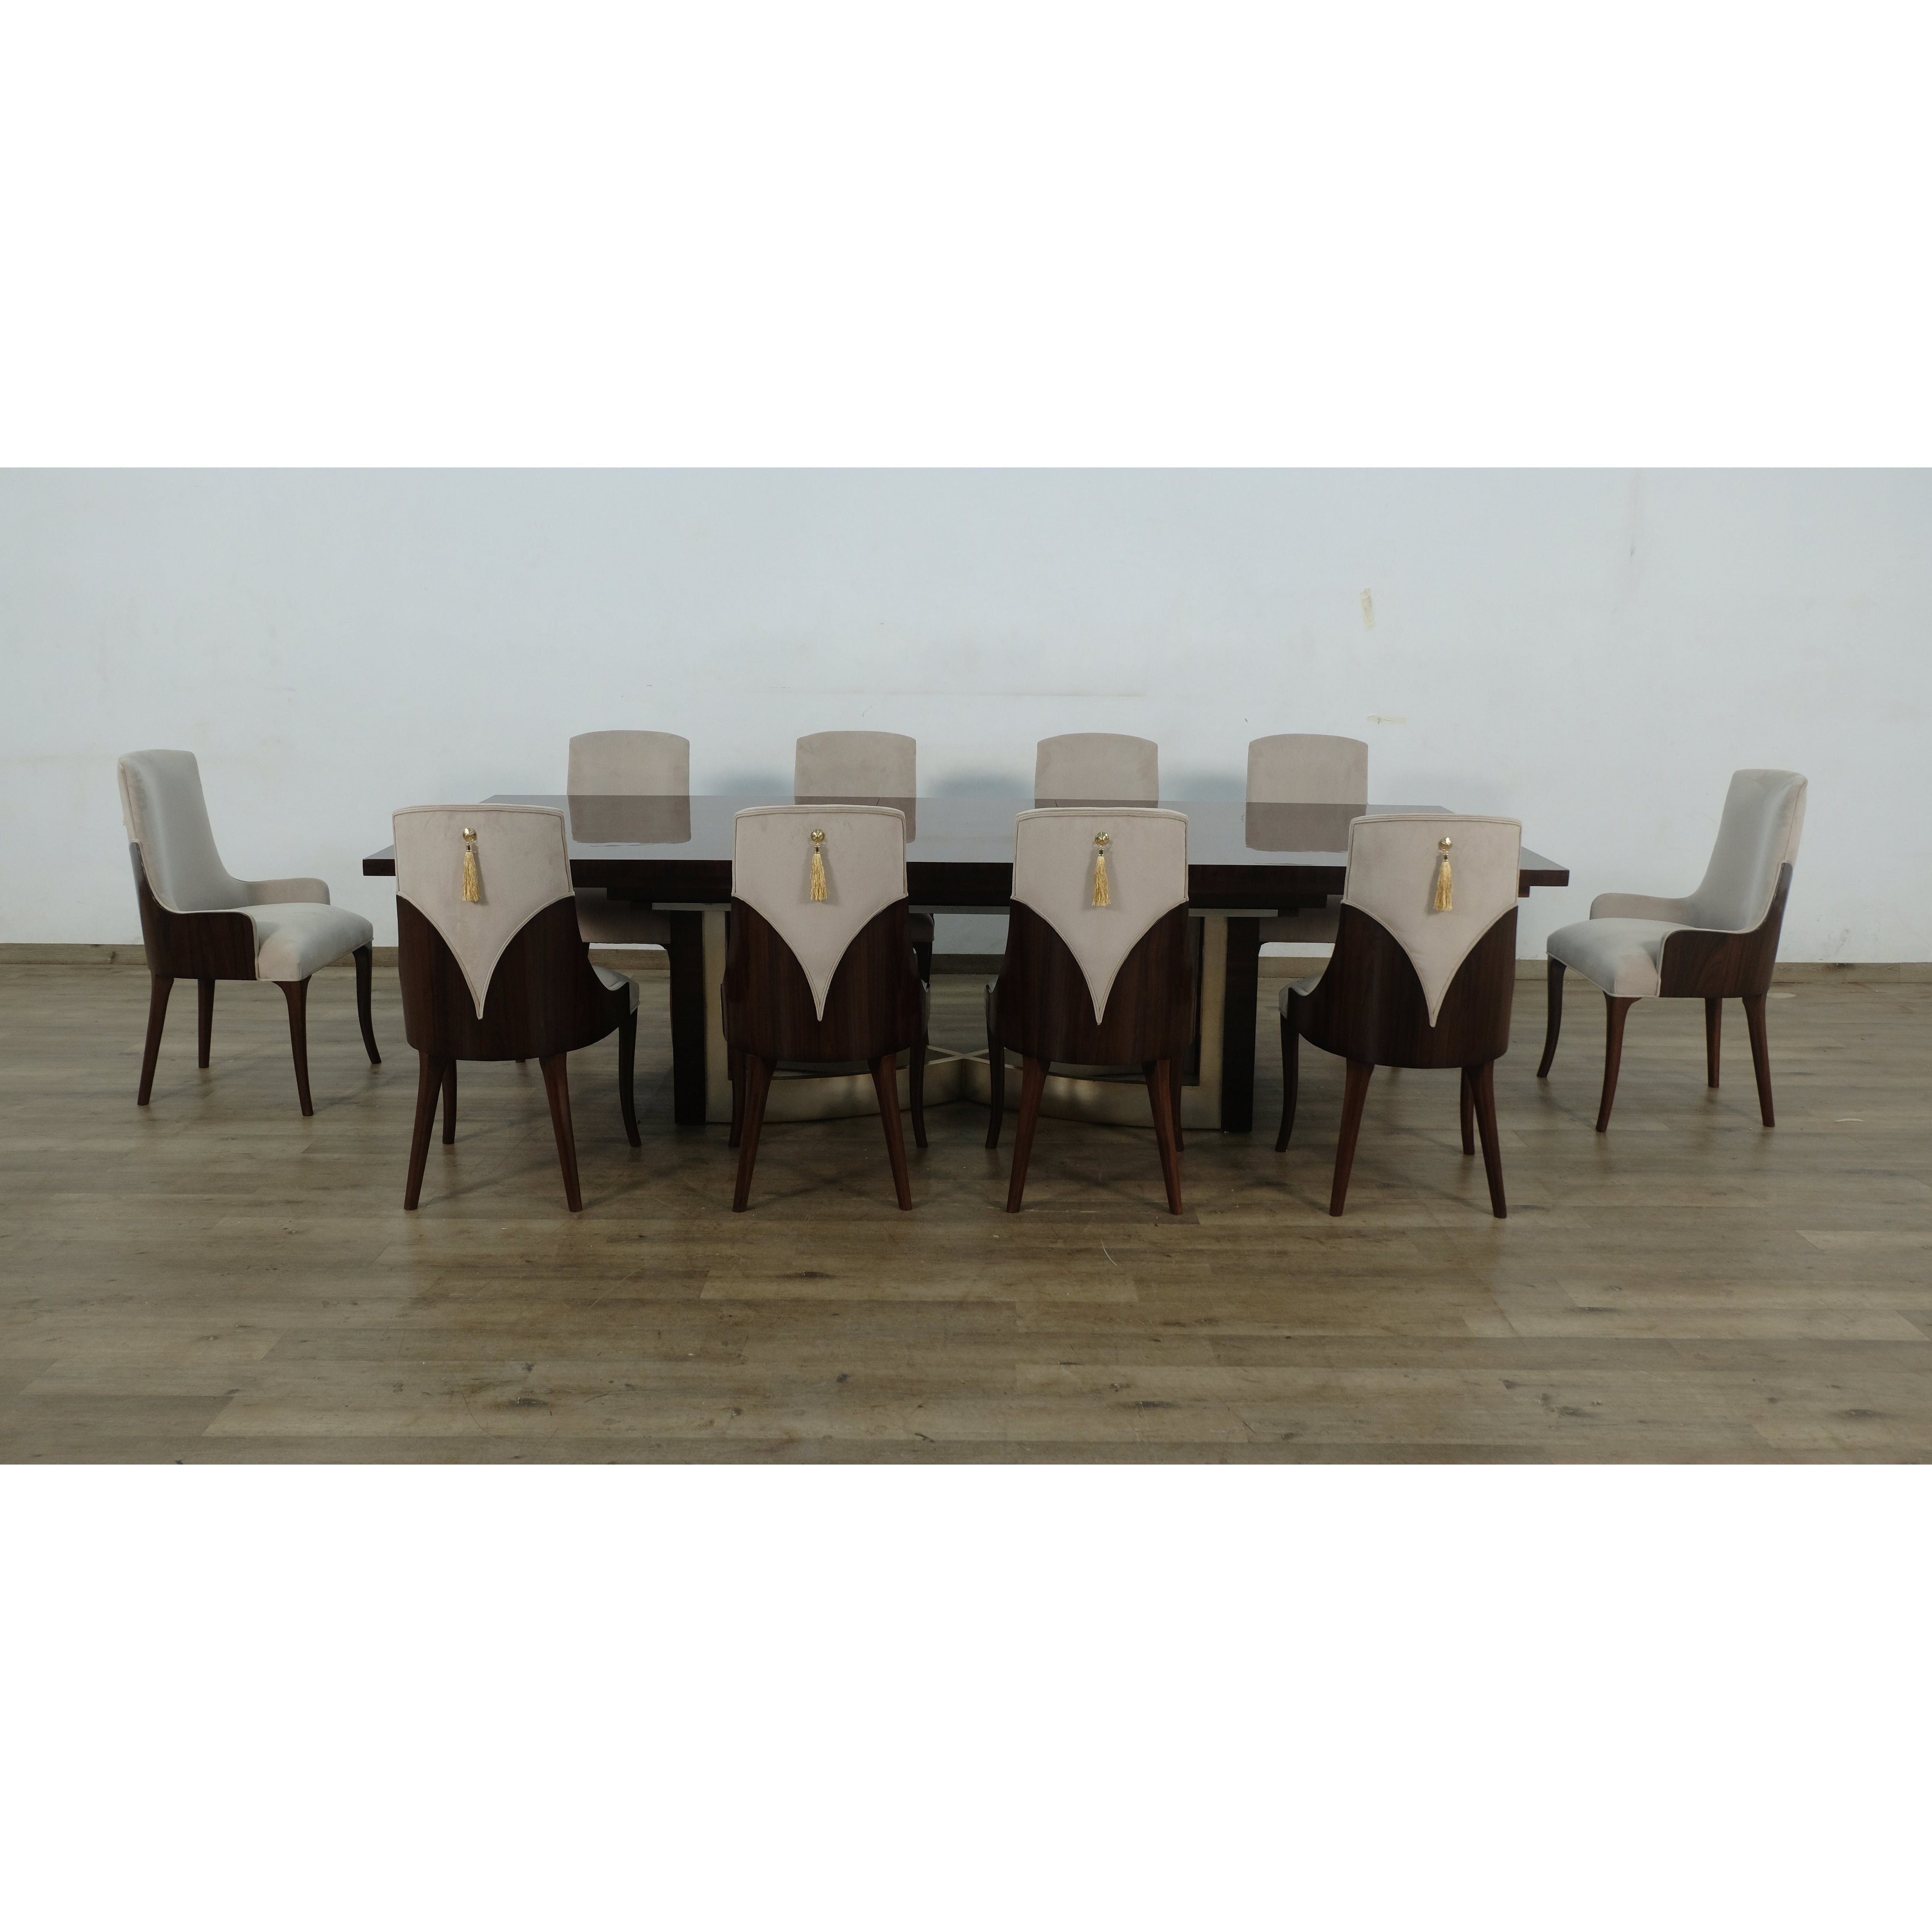 European Furniture - Glamour II 11 Piece Dining Room Set With Rosewood Chair - 56015-56017-11SET - New Star Living